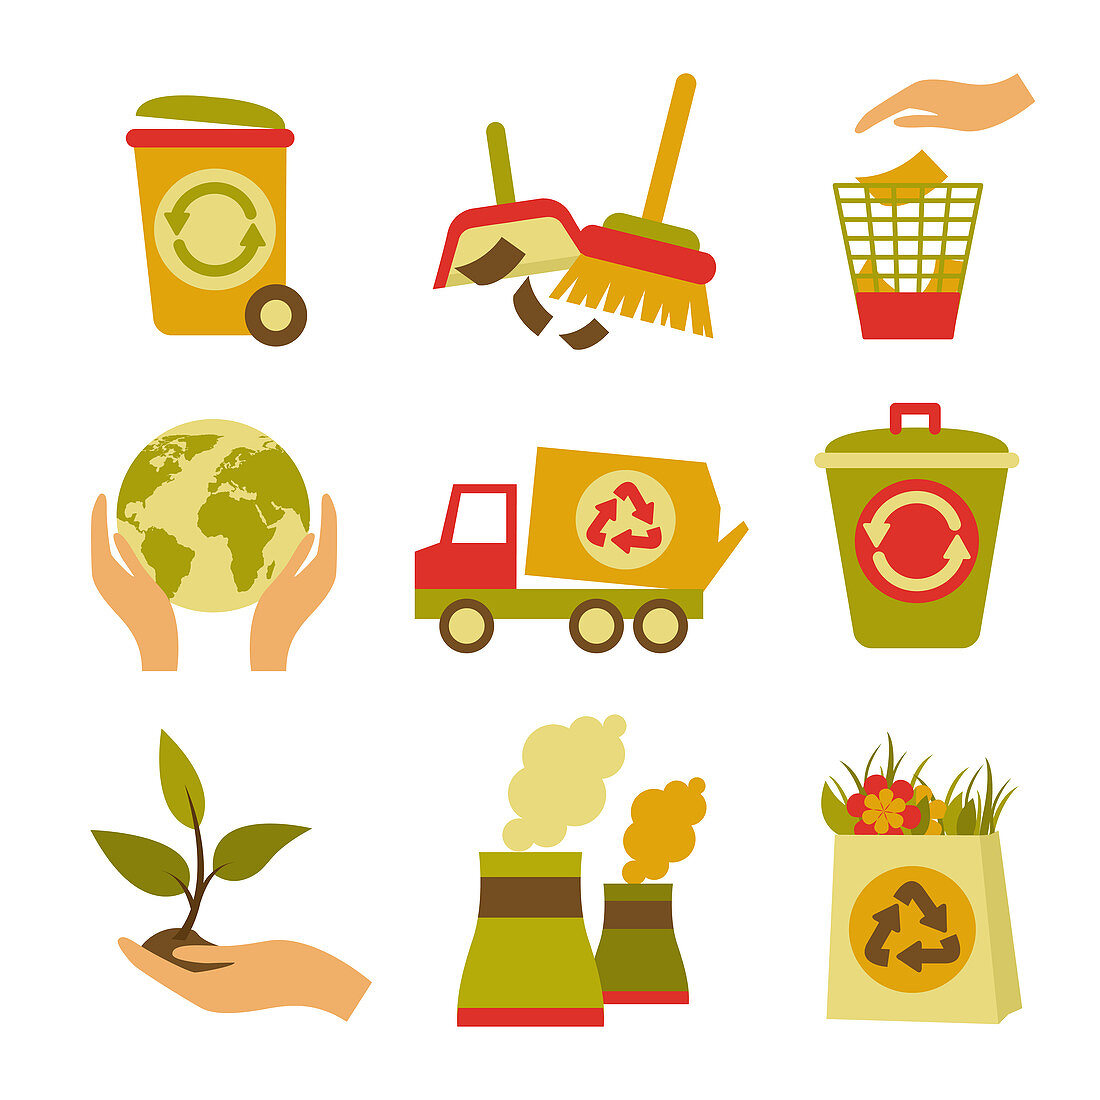 Ecology and recycling icons, illustration